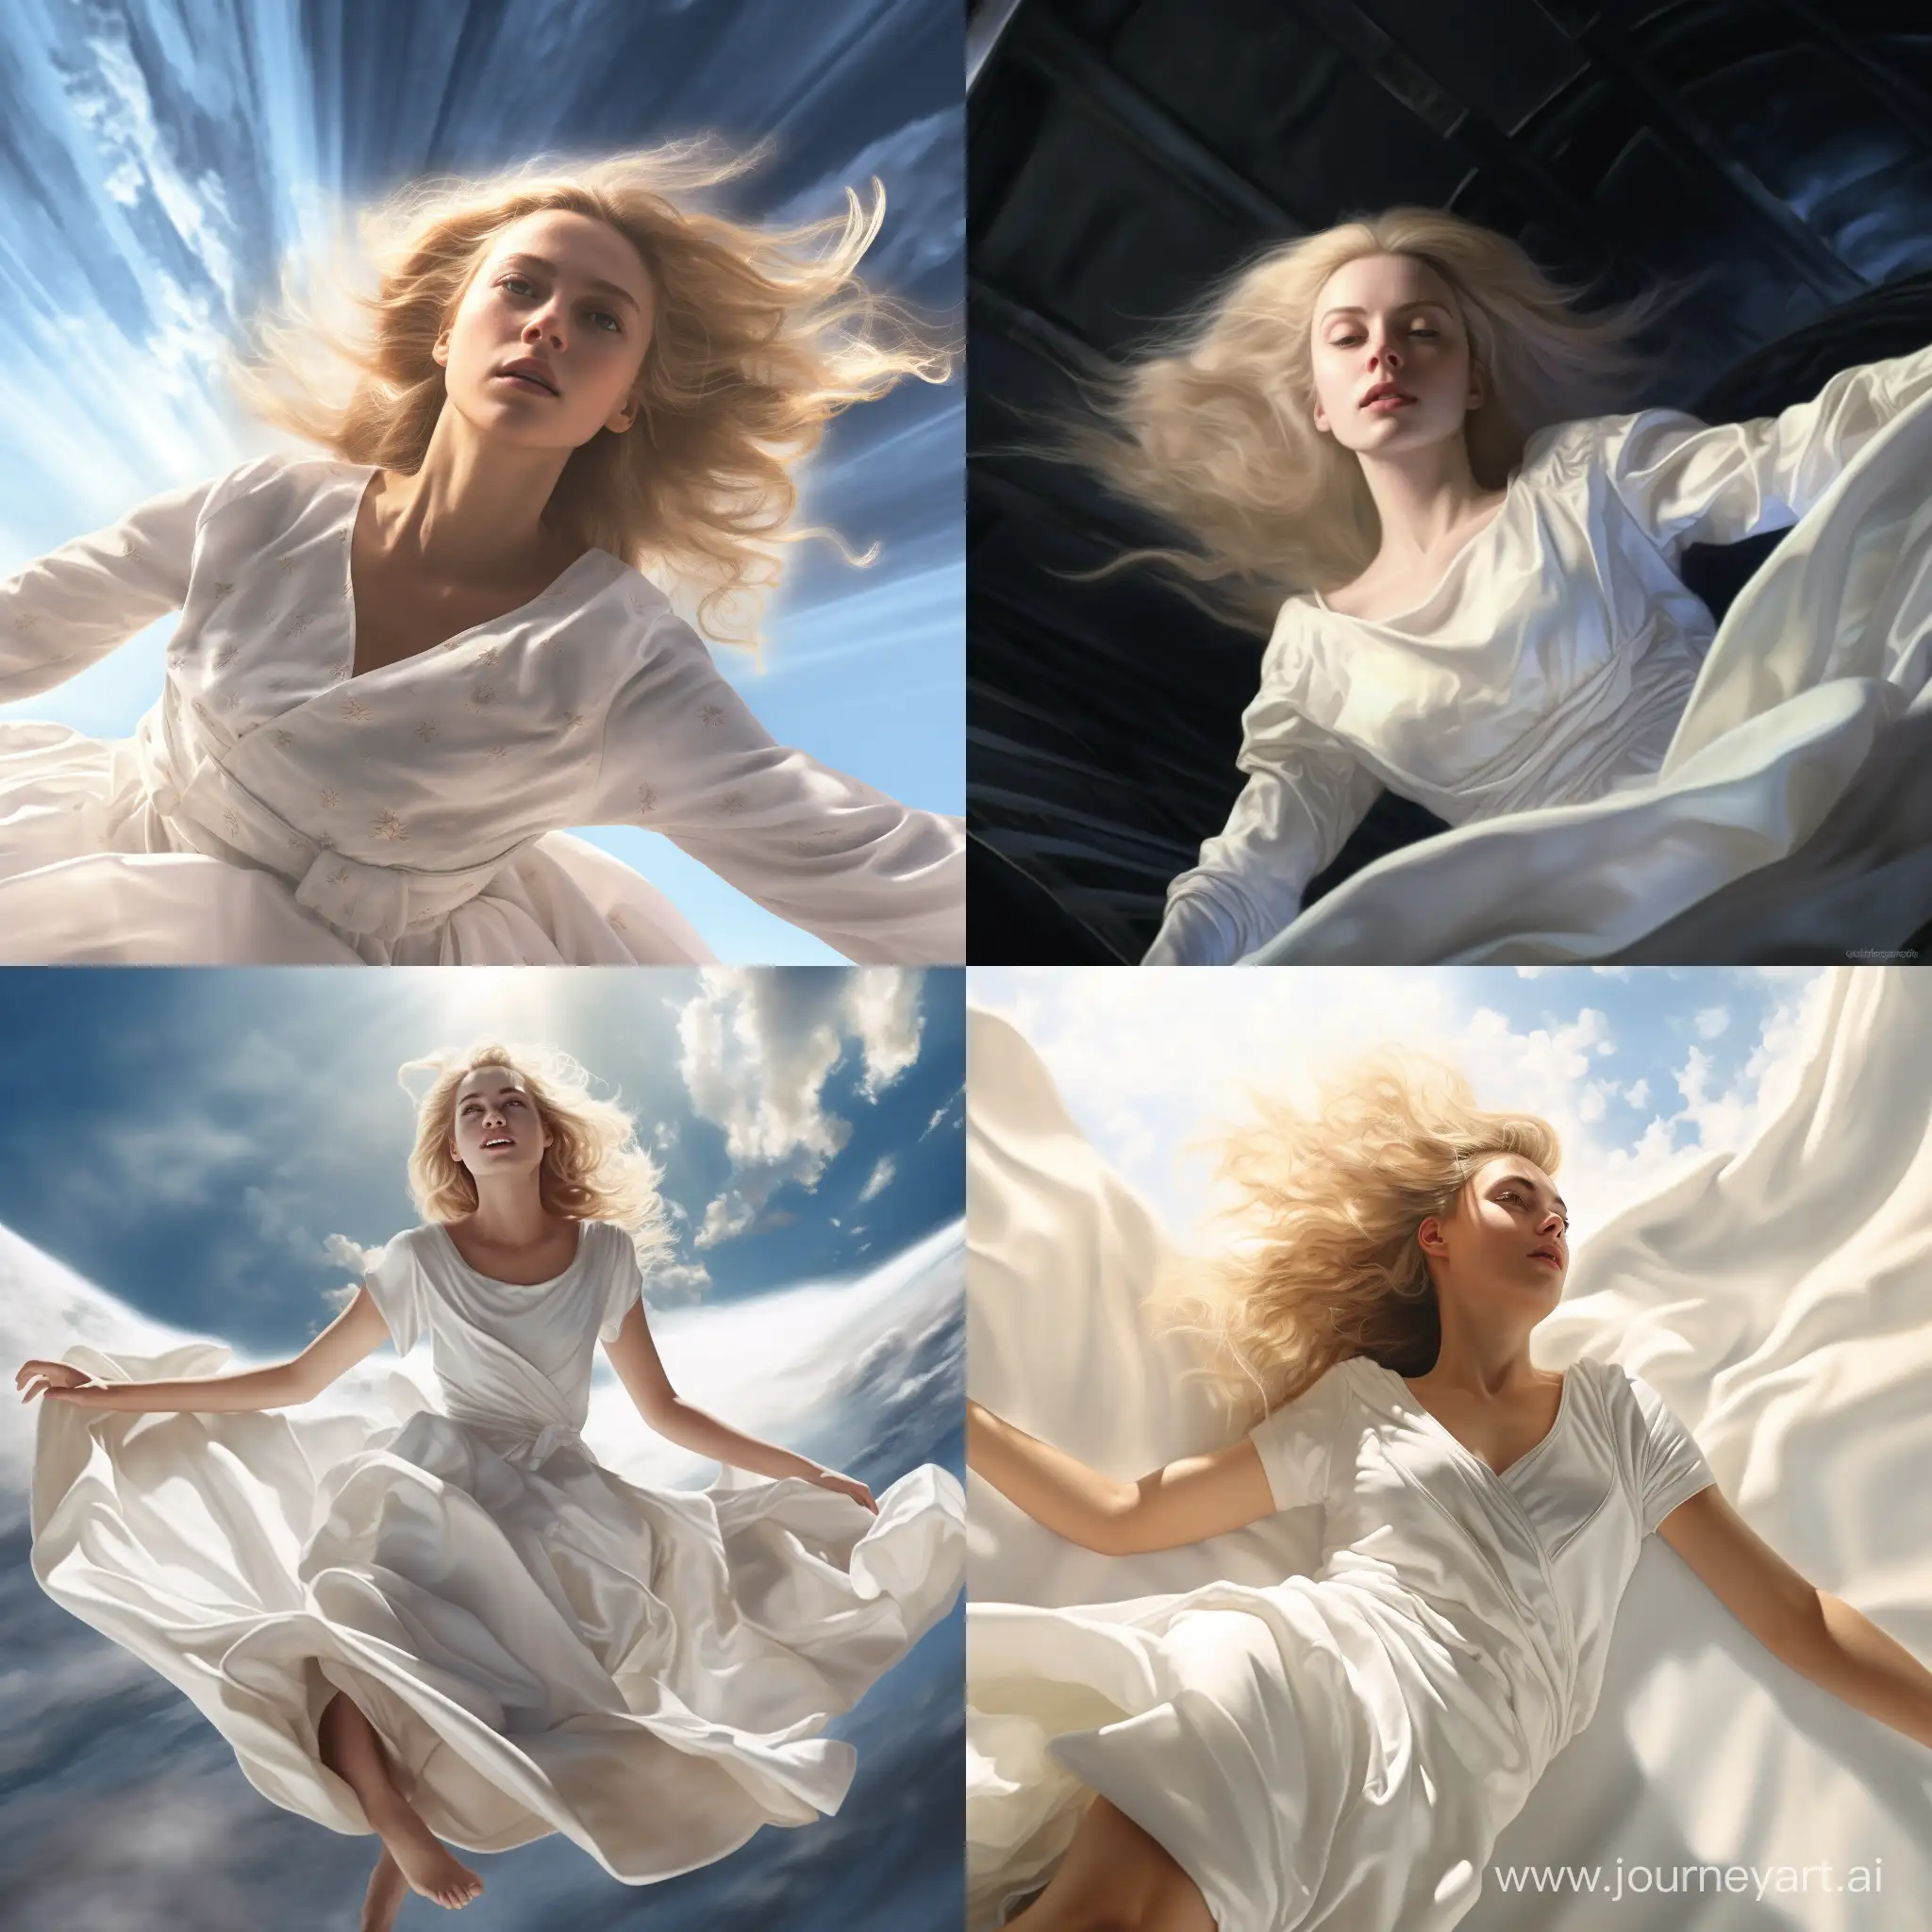 Blonde-Woman-Soaring-Through-Celestial-Beauty-in-White-Dressing-Gown